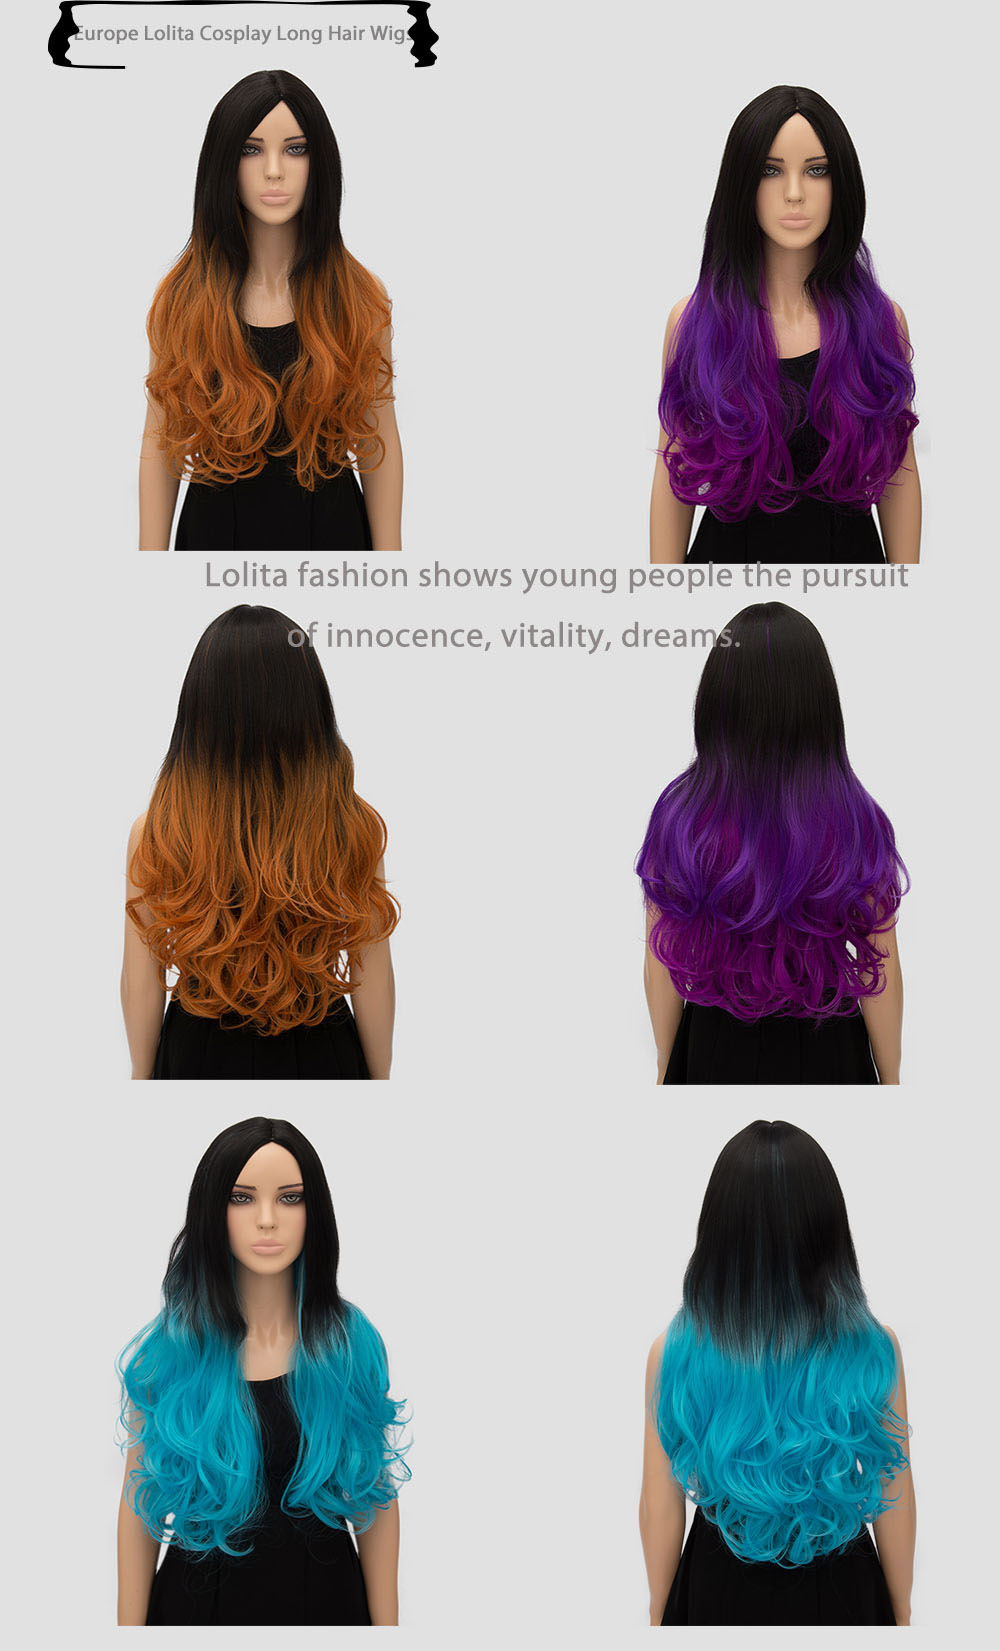 Women Europe Ombre Long Wavy Gradient Mixed Color Wigs Heat Resistant Synthetic Hair Cosplay Party